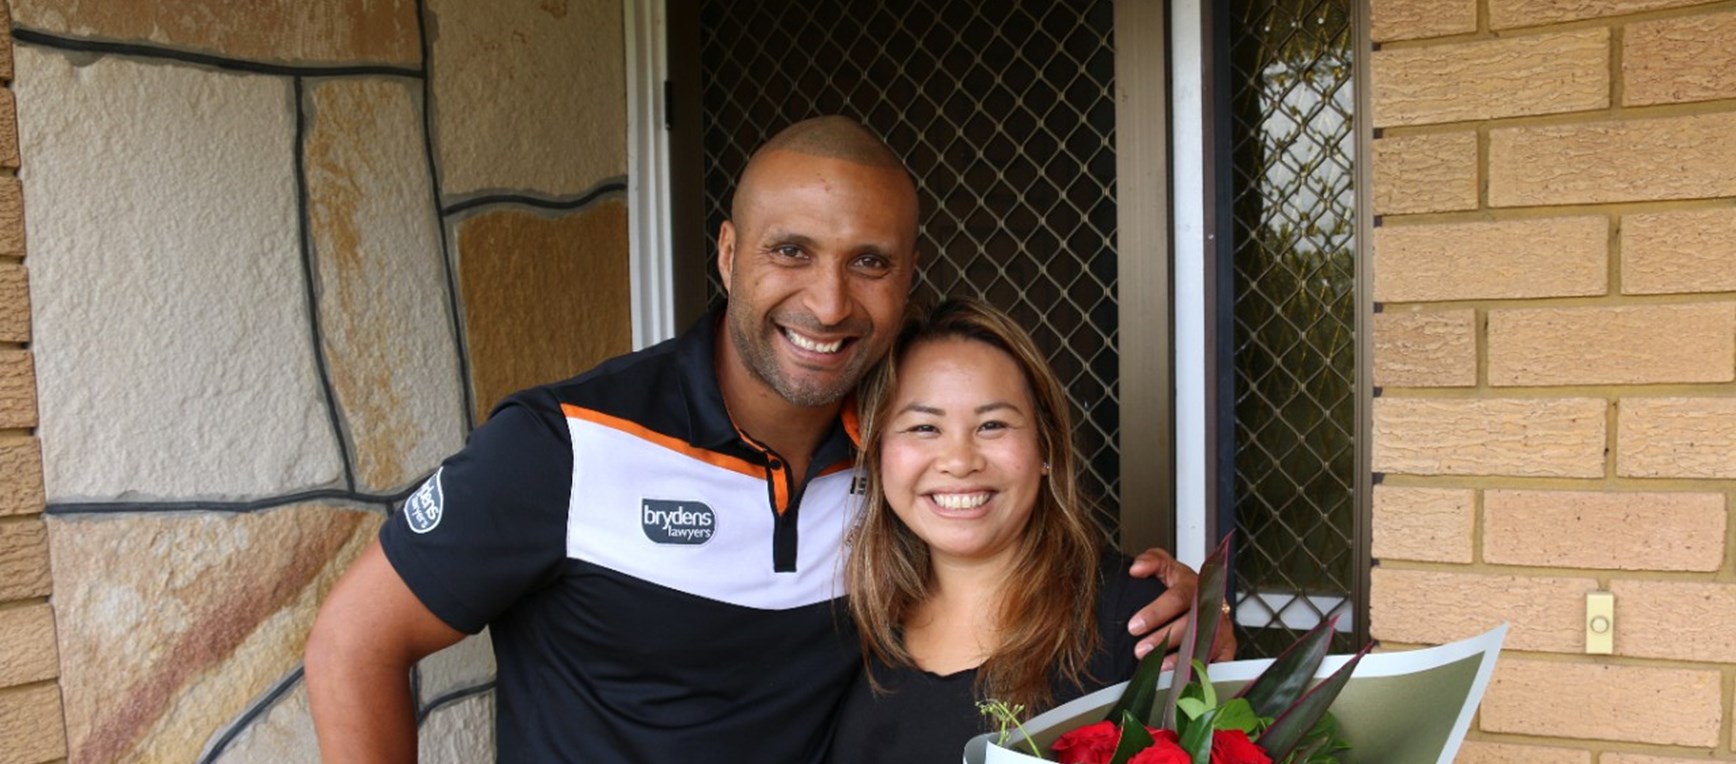 Gallery: Whatuira visits Members for Valentine's Day